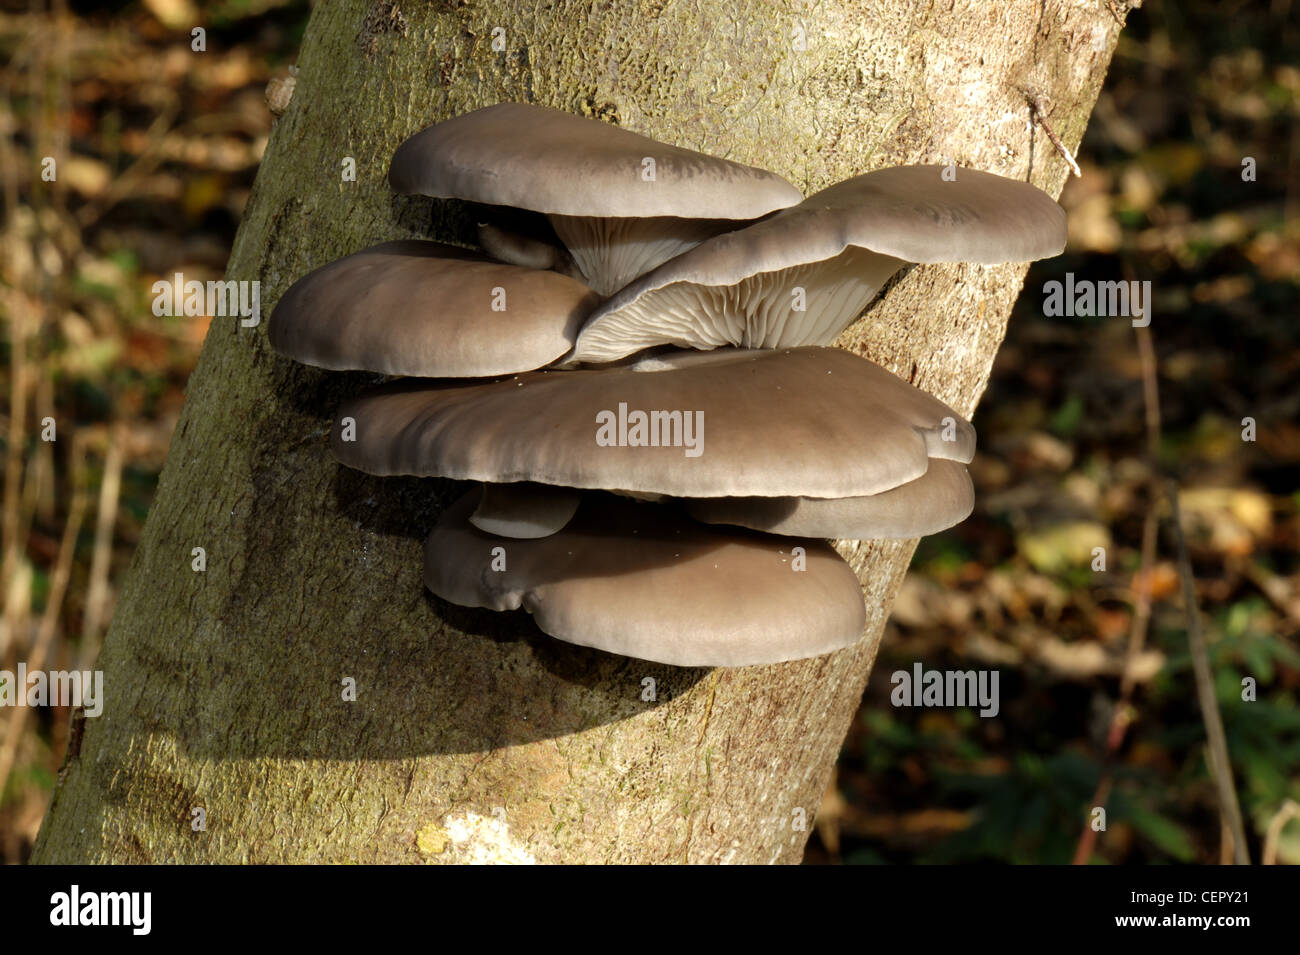 Cultivated oyster mushroom (Pleurotus ostreatus) growing on a beech log after incubation Stock Photo